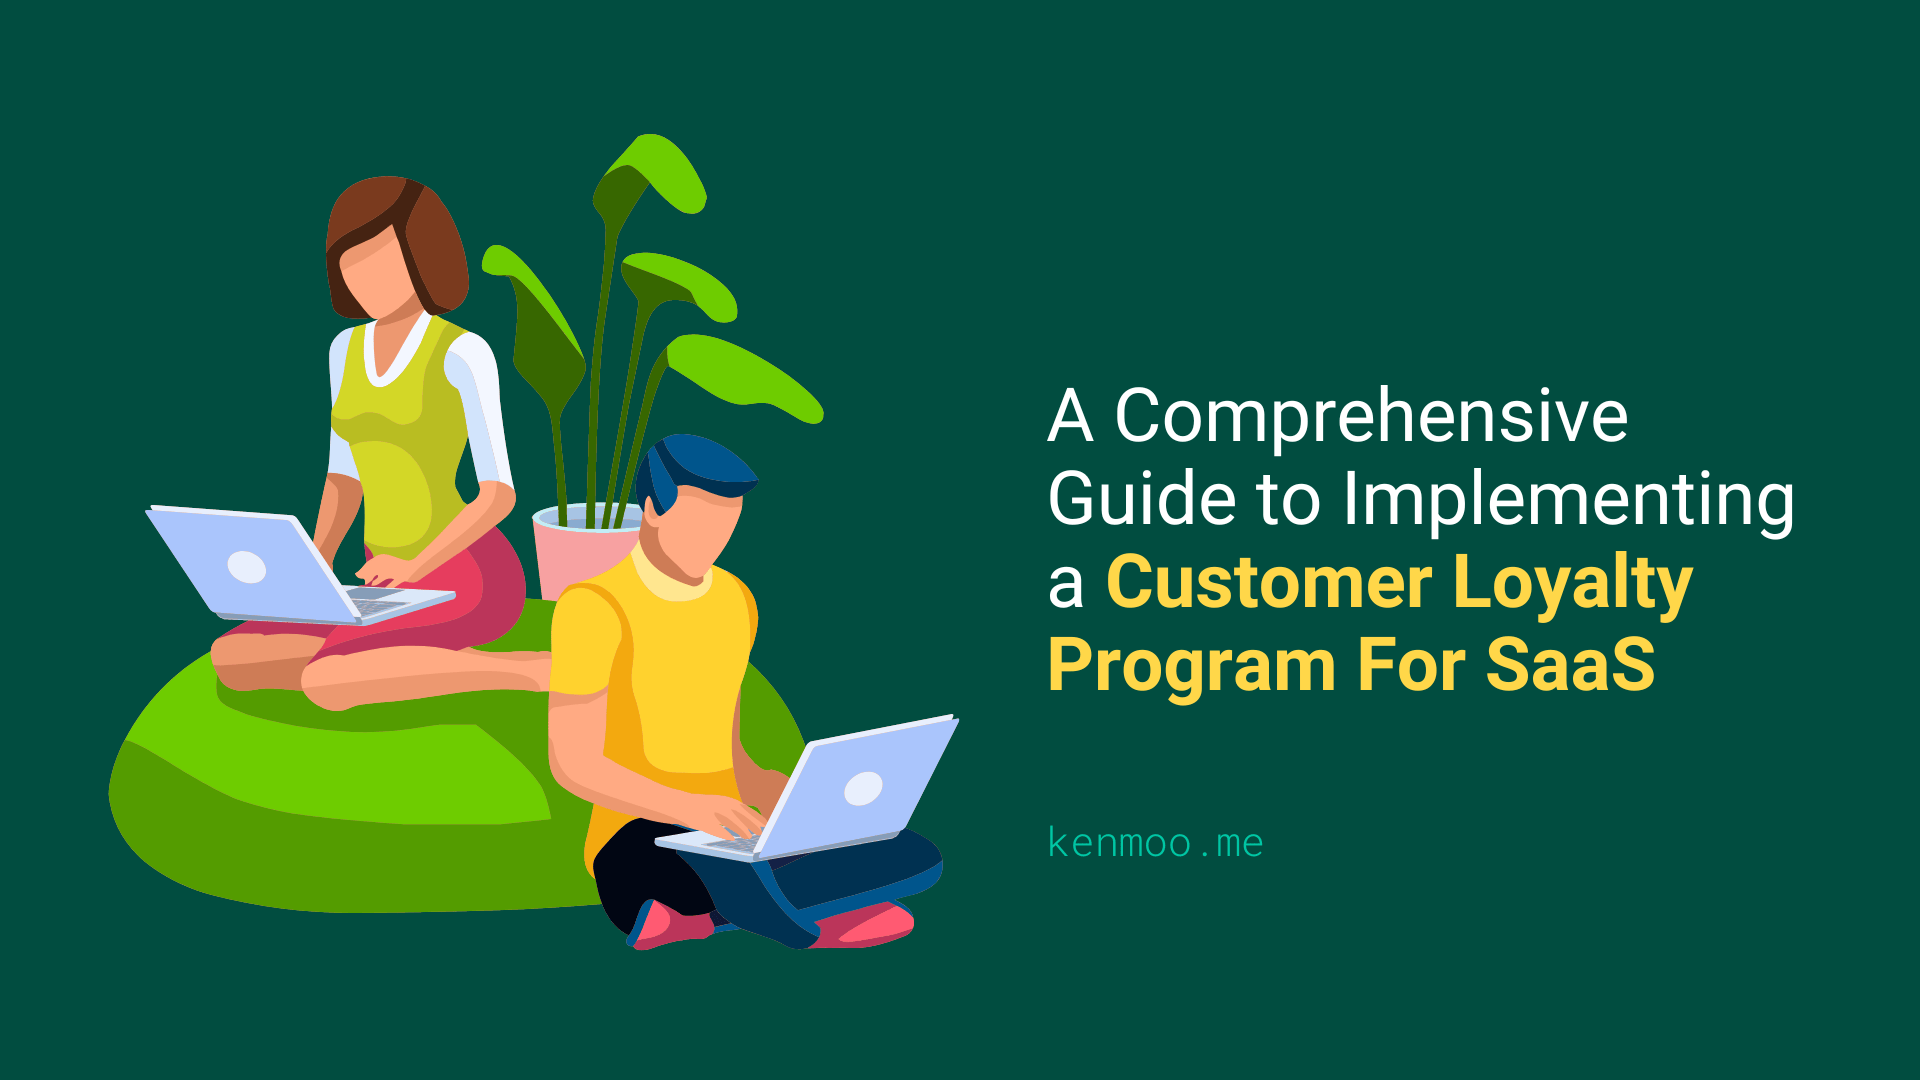 A Comprehensive Guide to Implementing a Customer Loyalty Program For SaaS